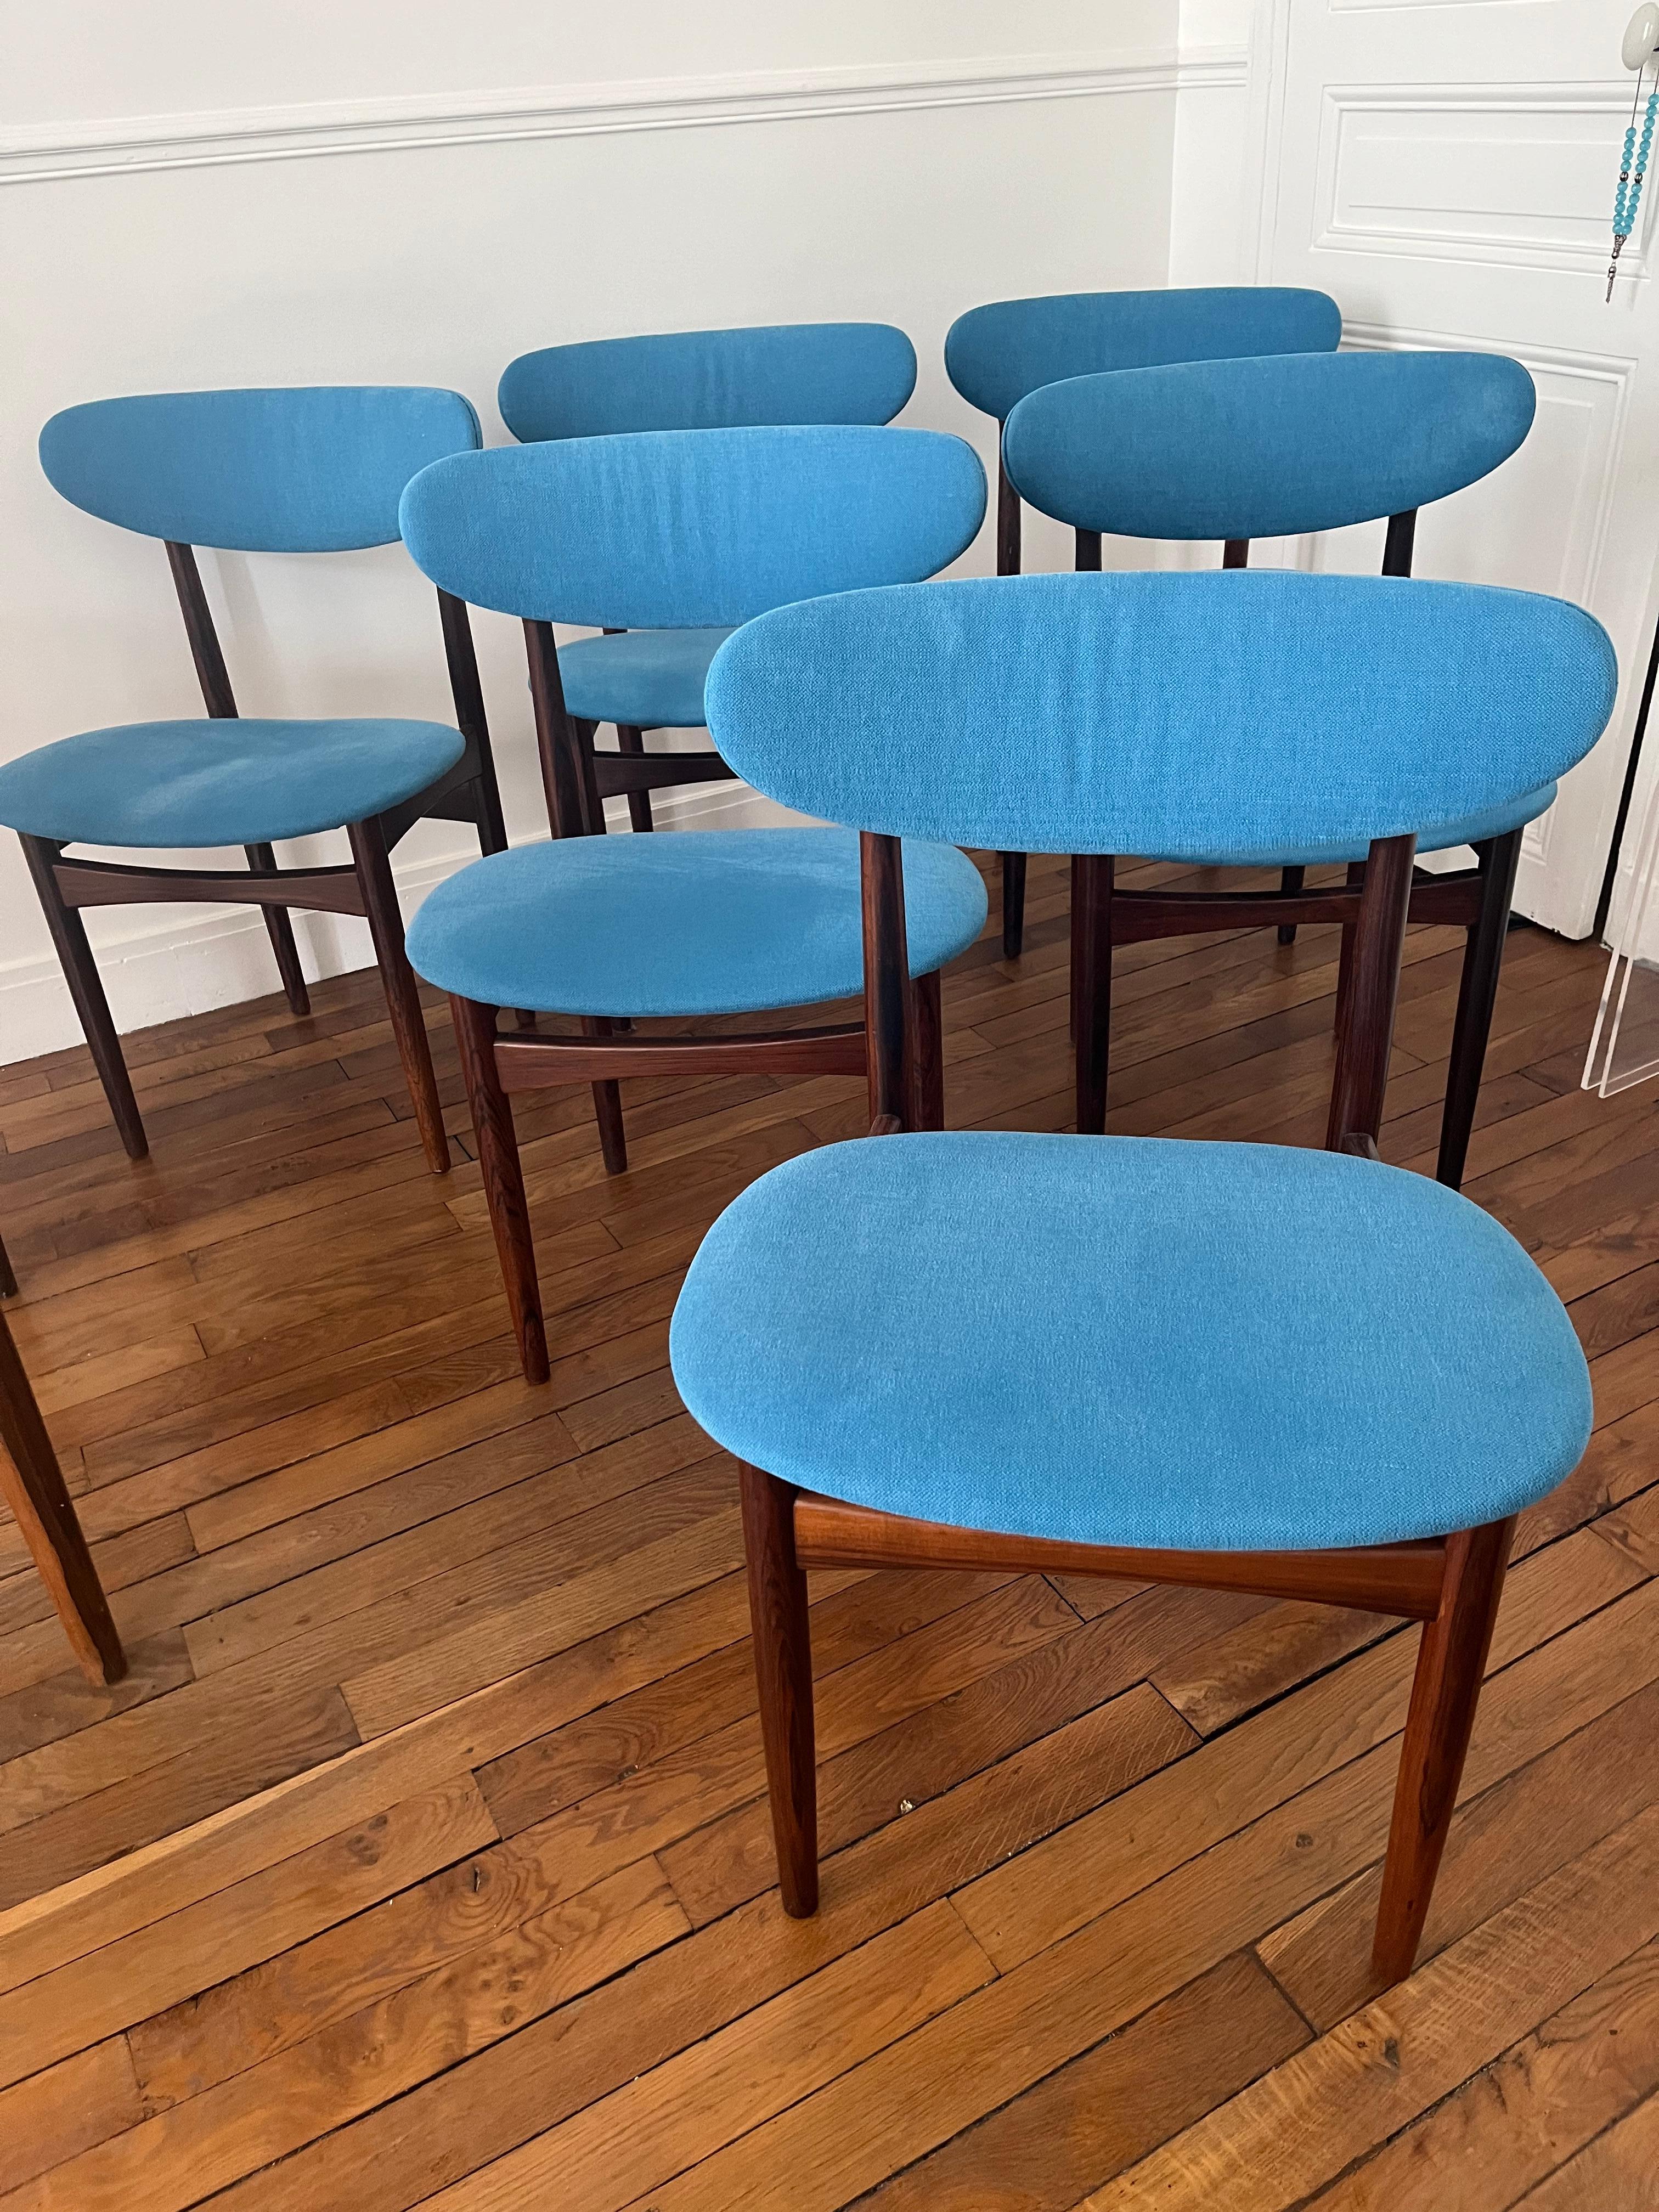 Kofod Larsen  6 chairs  Rio rosewood and blue fabric Circa 1971 In Good Condition For Sale In Saint ouen, FR